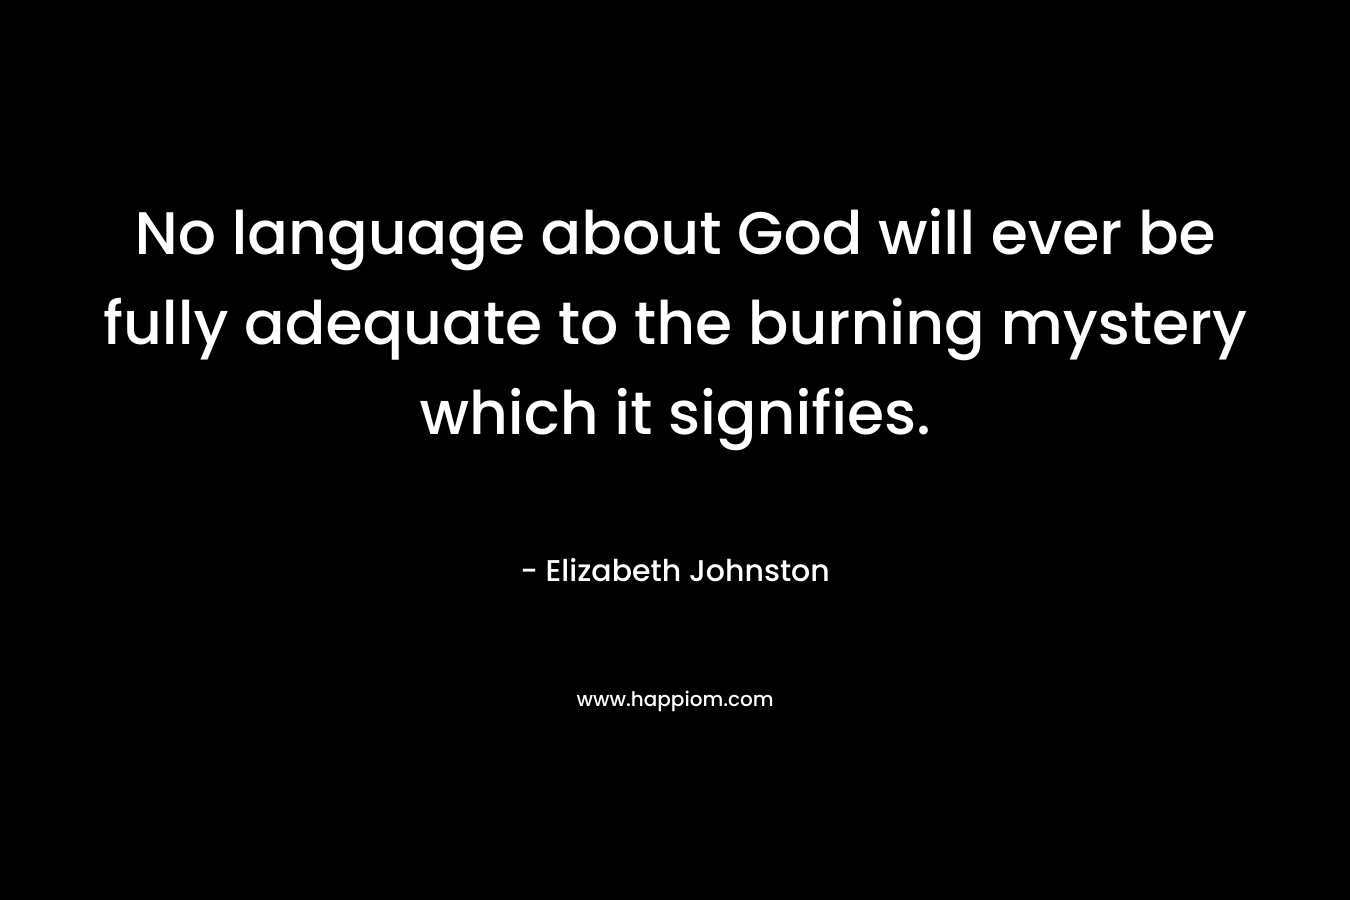 No language about God will ever be fully adequate to the burning mystery which it signifies.